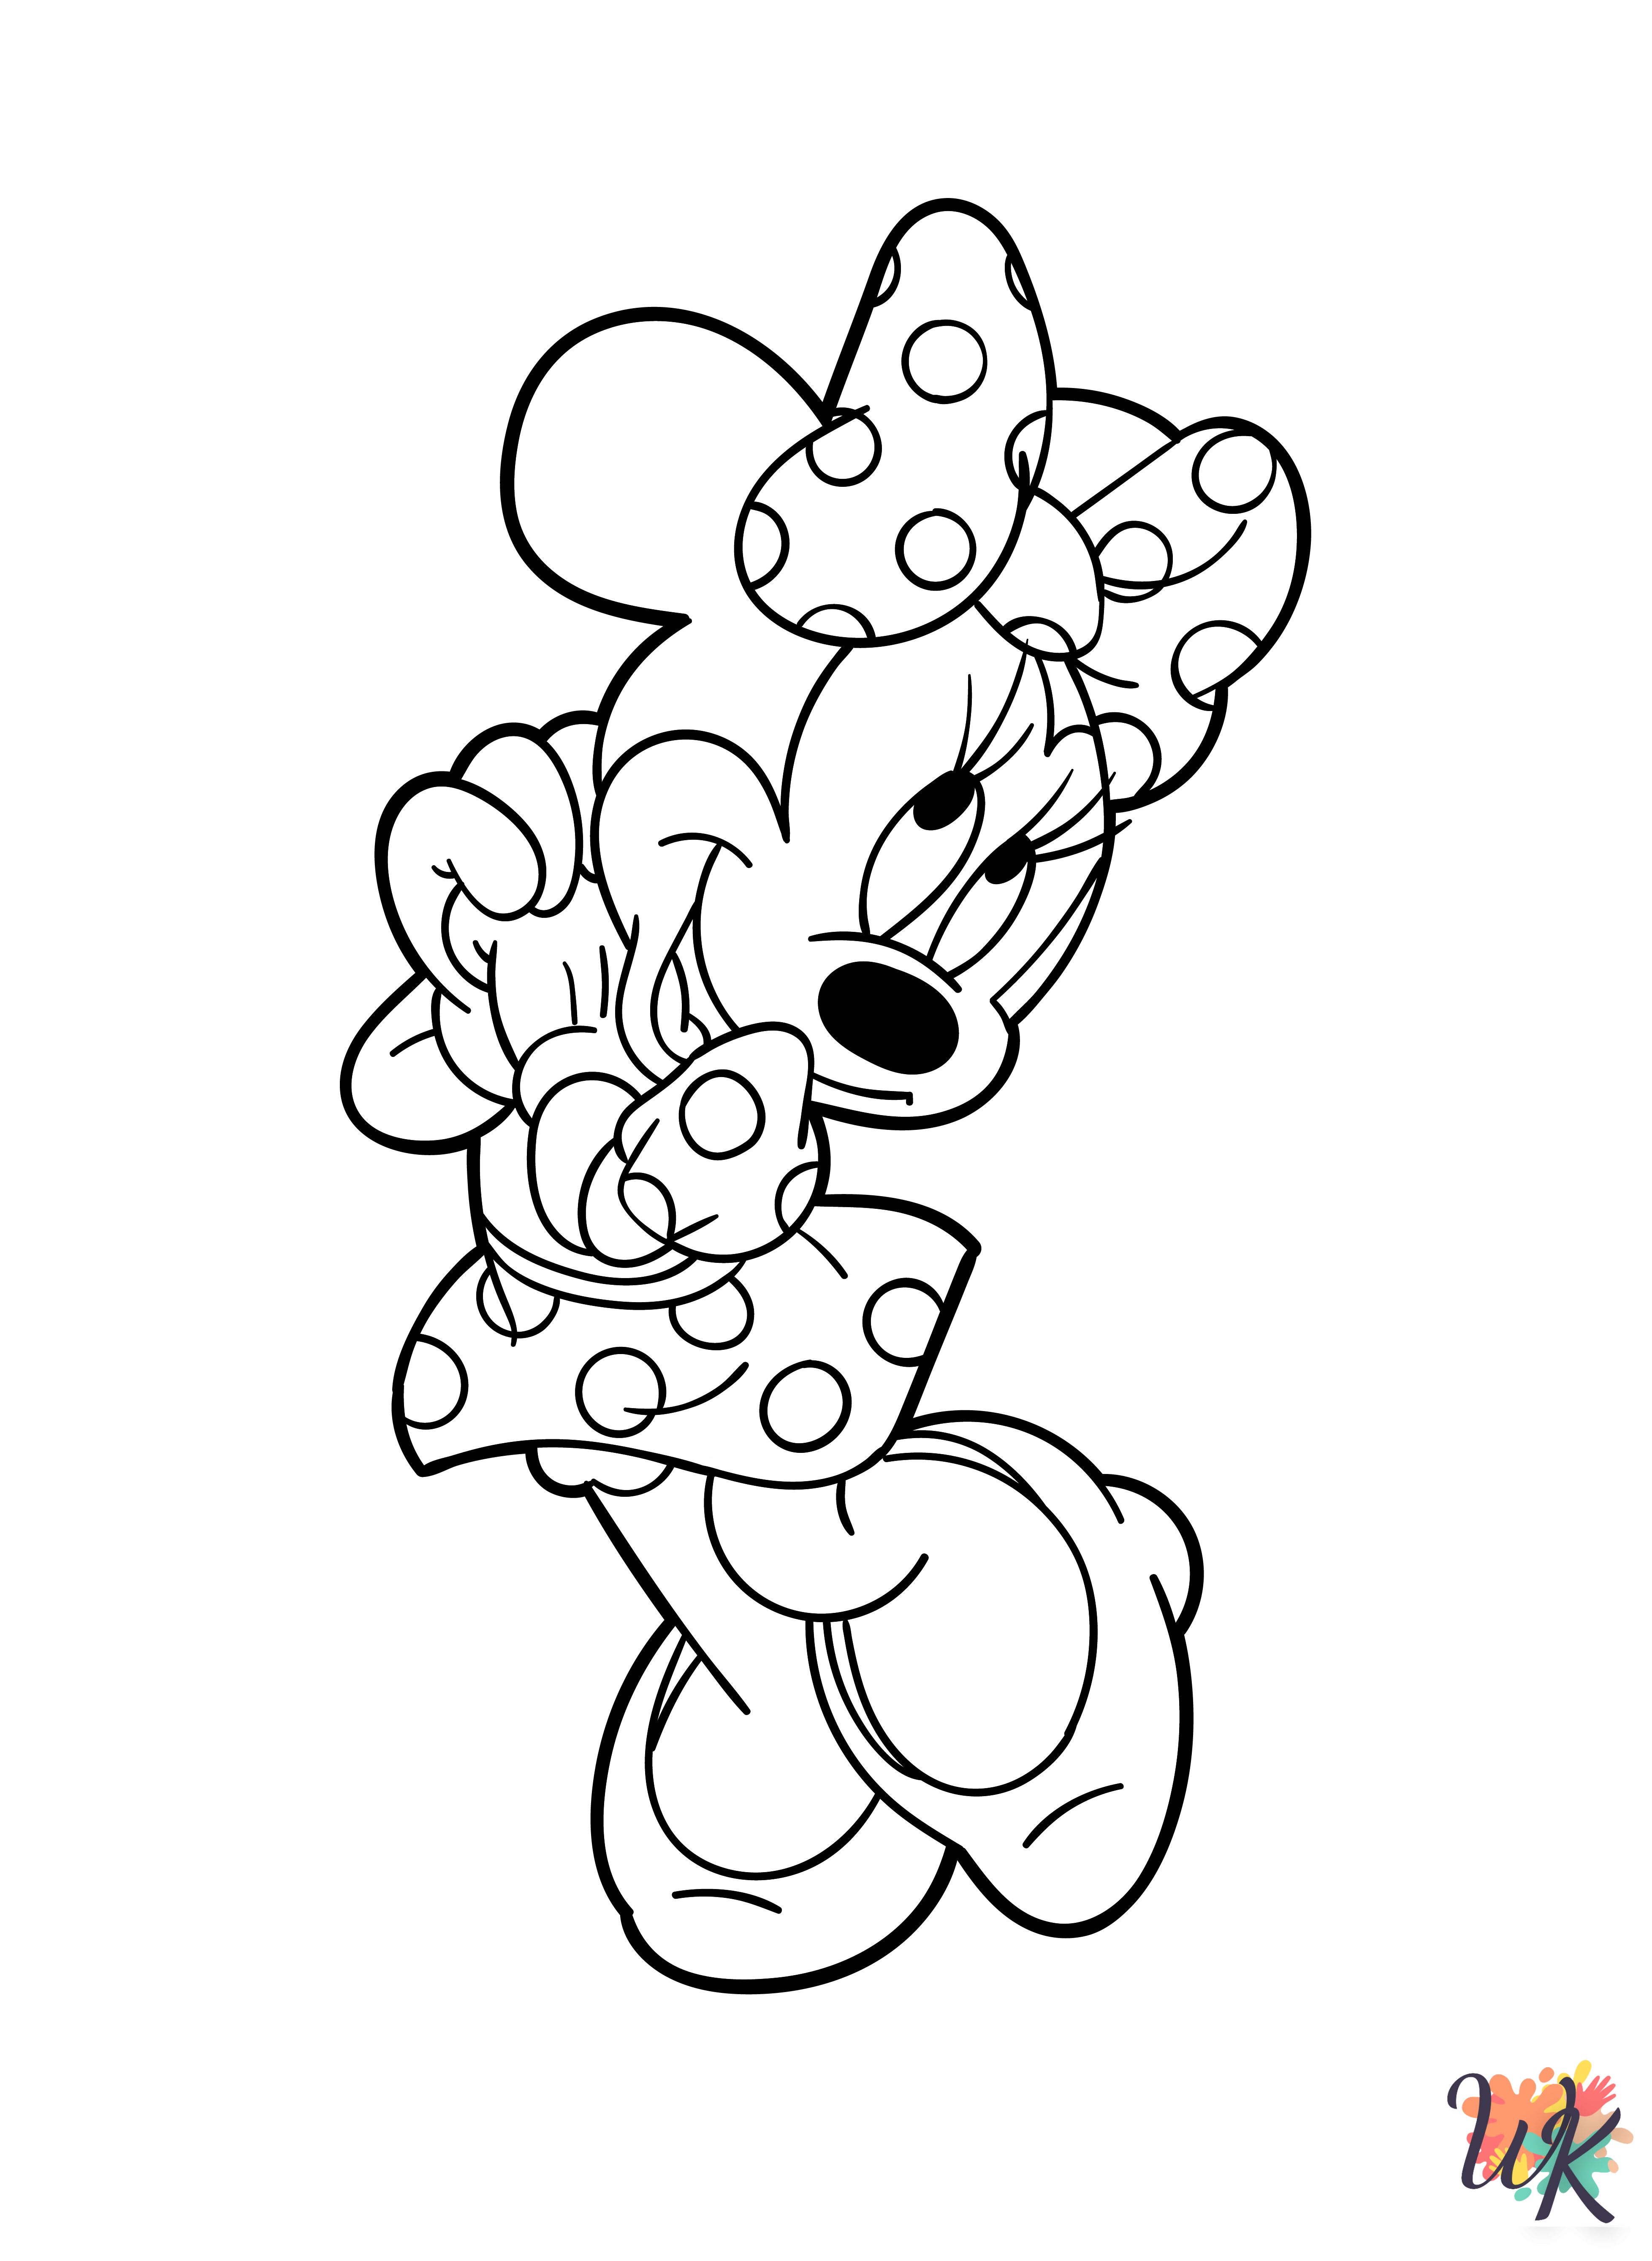 Minnie Mouse free coloring pages